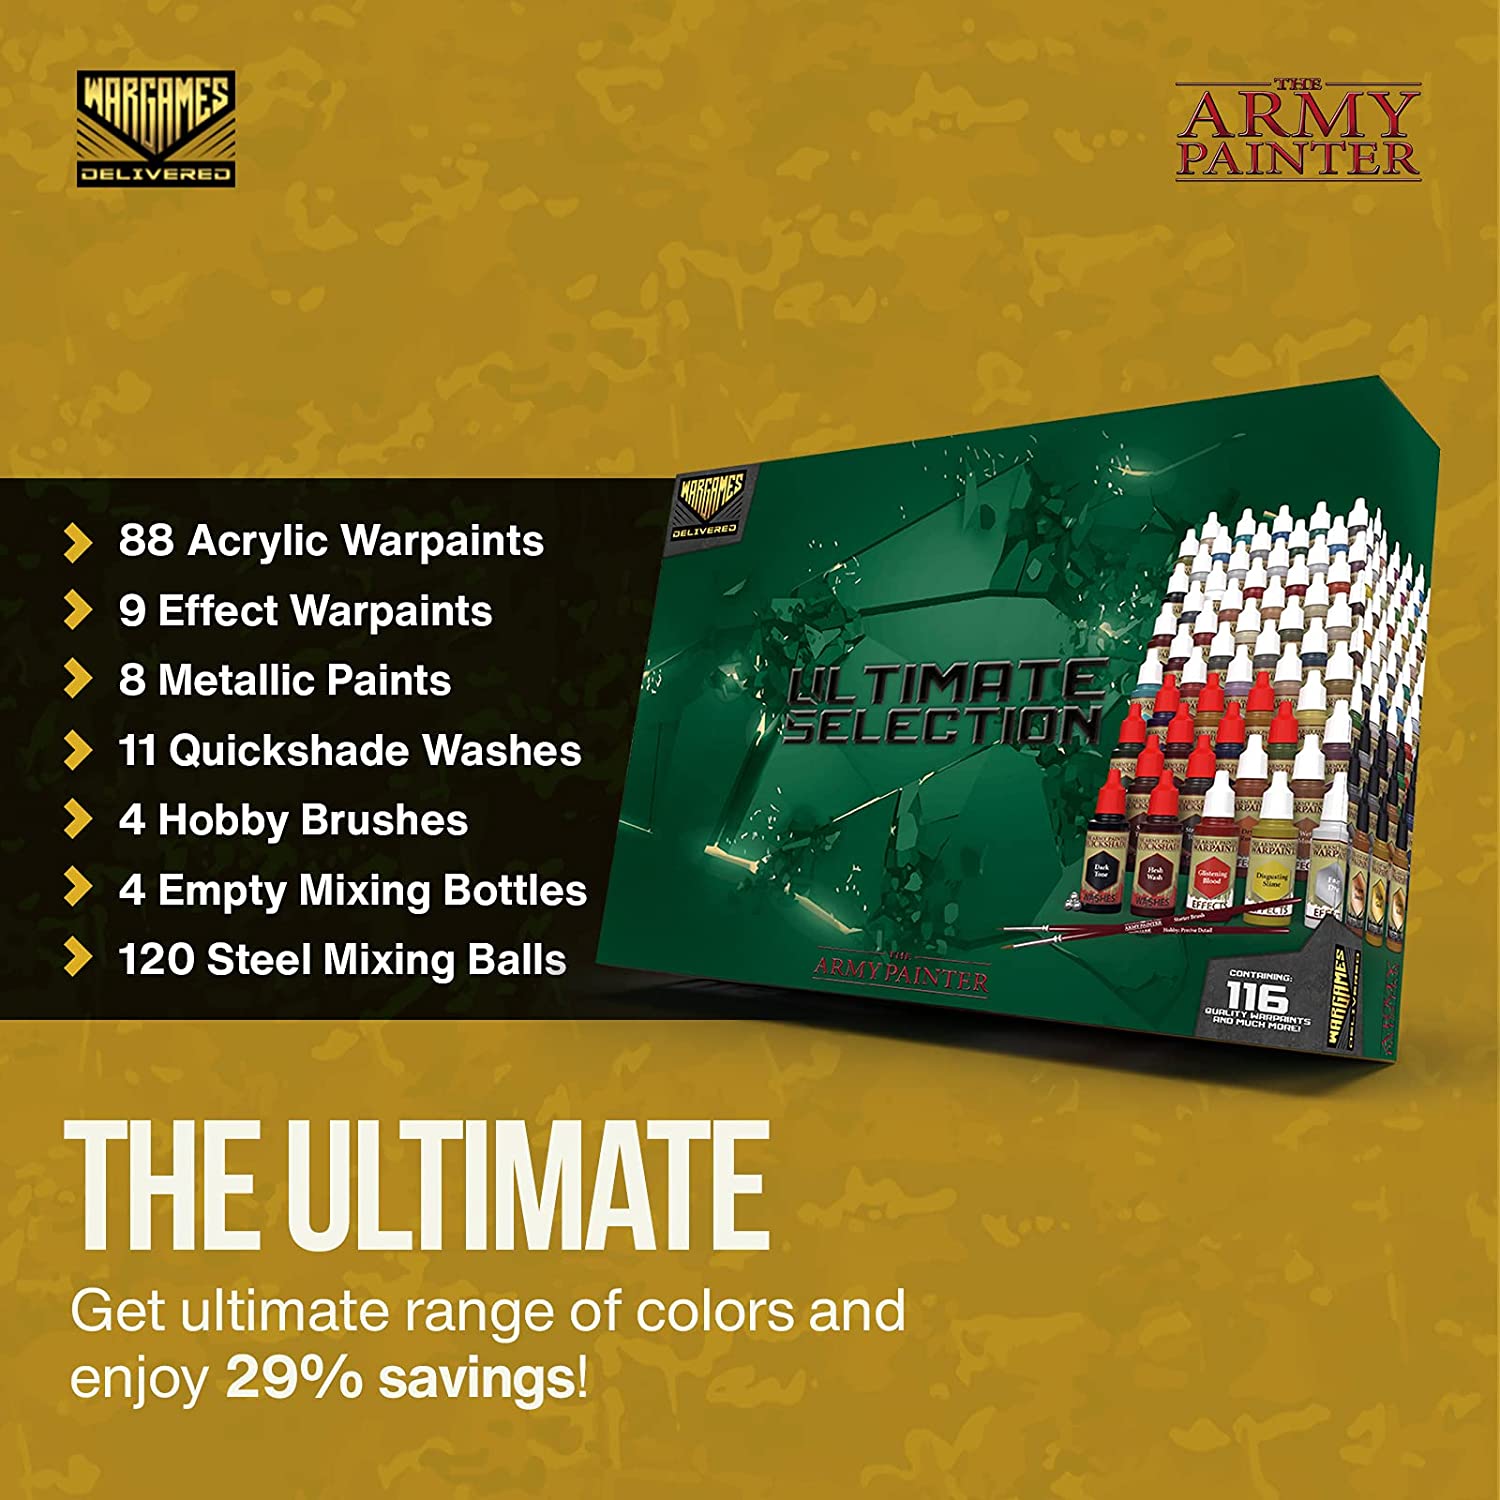 The Army Painter - Ultimate Selection Hobby Paint Set – Wargames Delivered